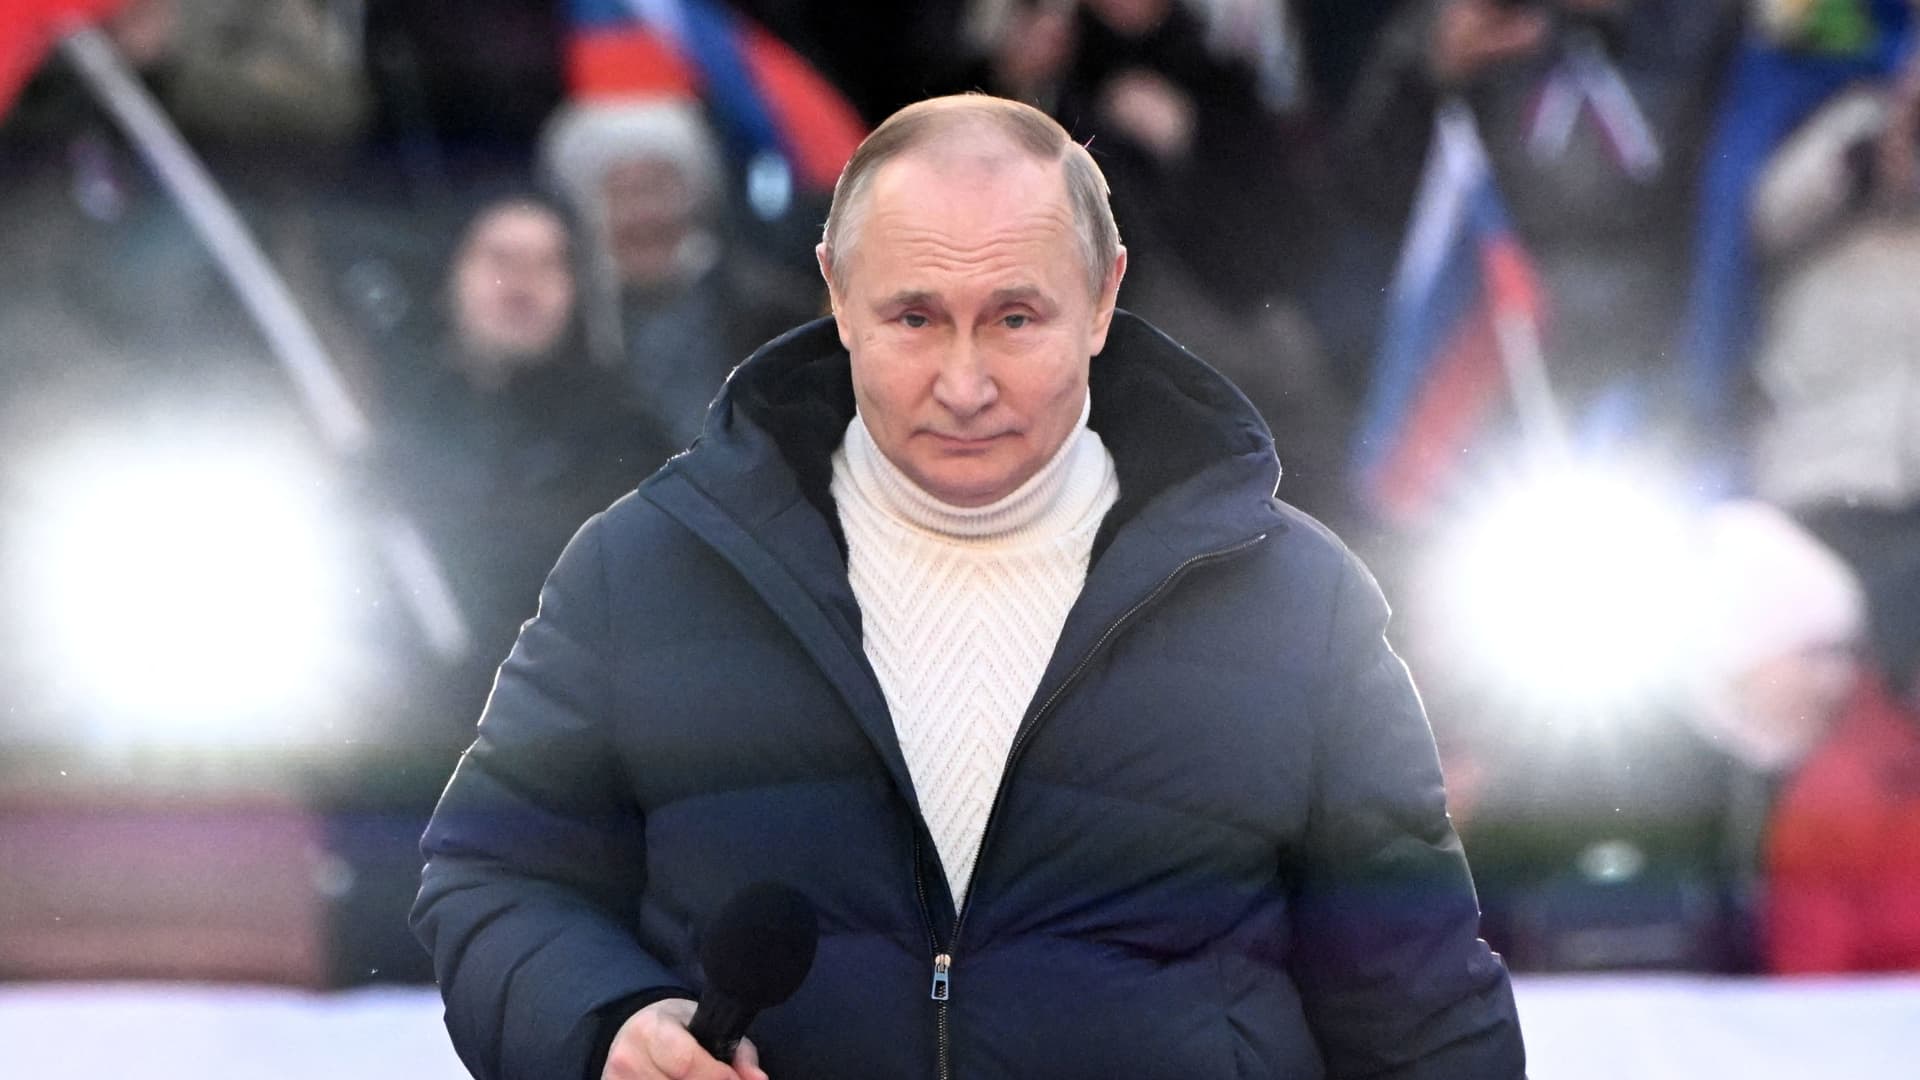 Putin might be seen as a 'mad dictator' — but he has built powerful barriers to prevent a coup